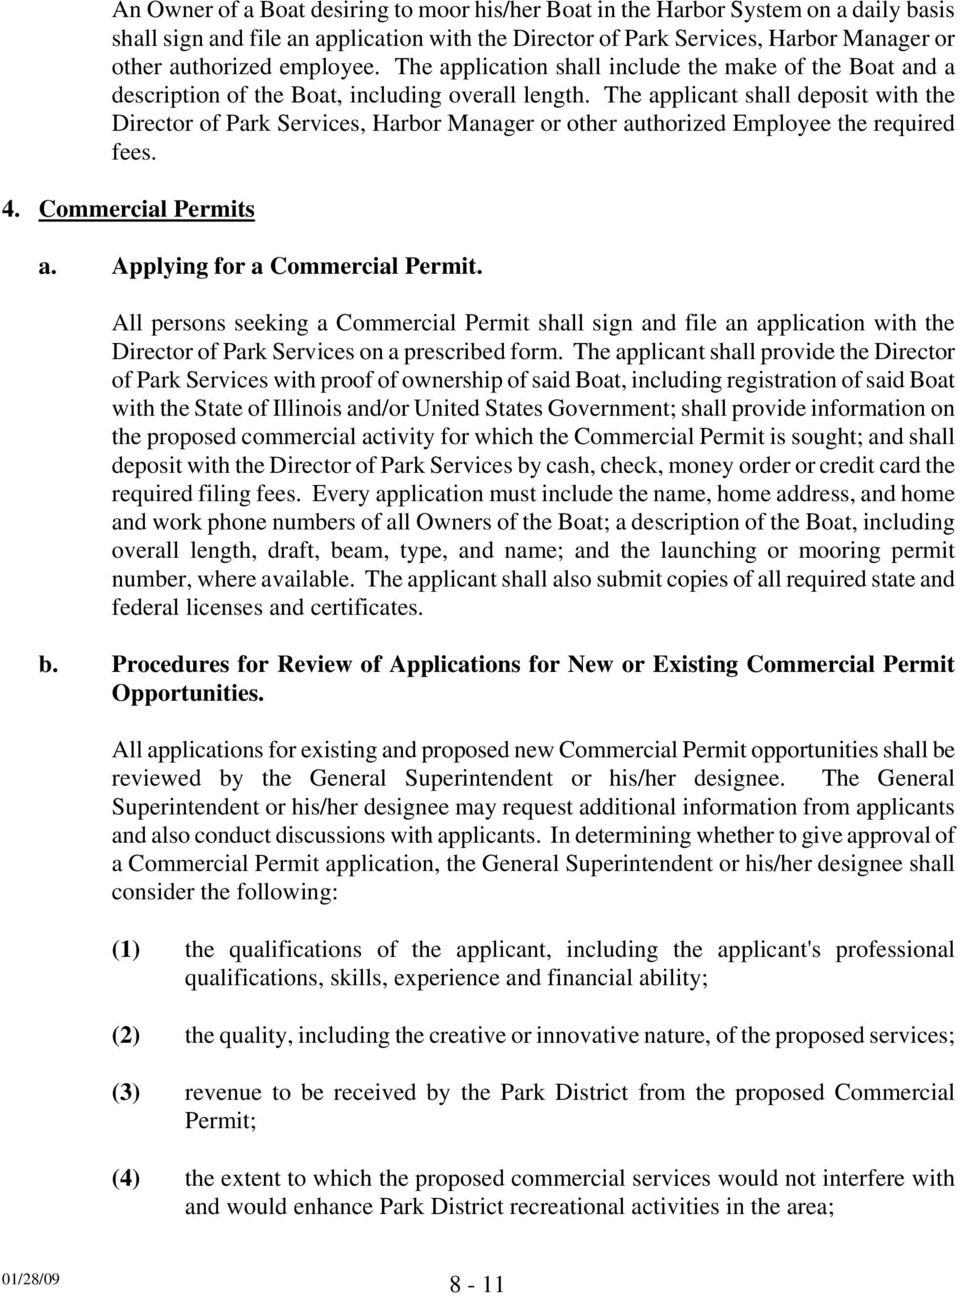 The applicant shall deposit with the Director of Park Services, Harbor Manager or other authorized Employee the required fees. 4. Commercial Permits a. Applying for a Commercial Permit.